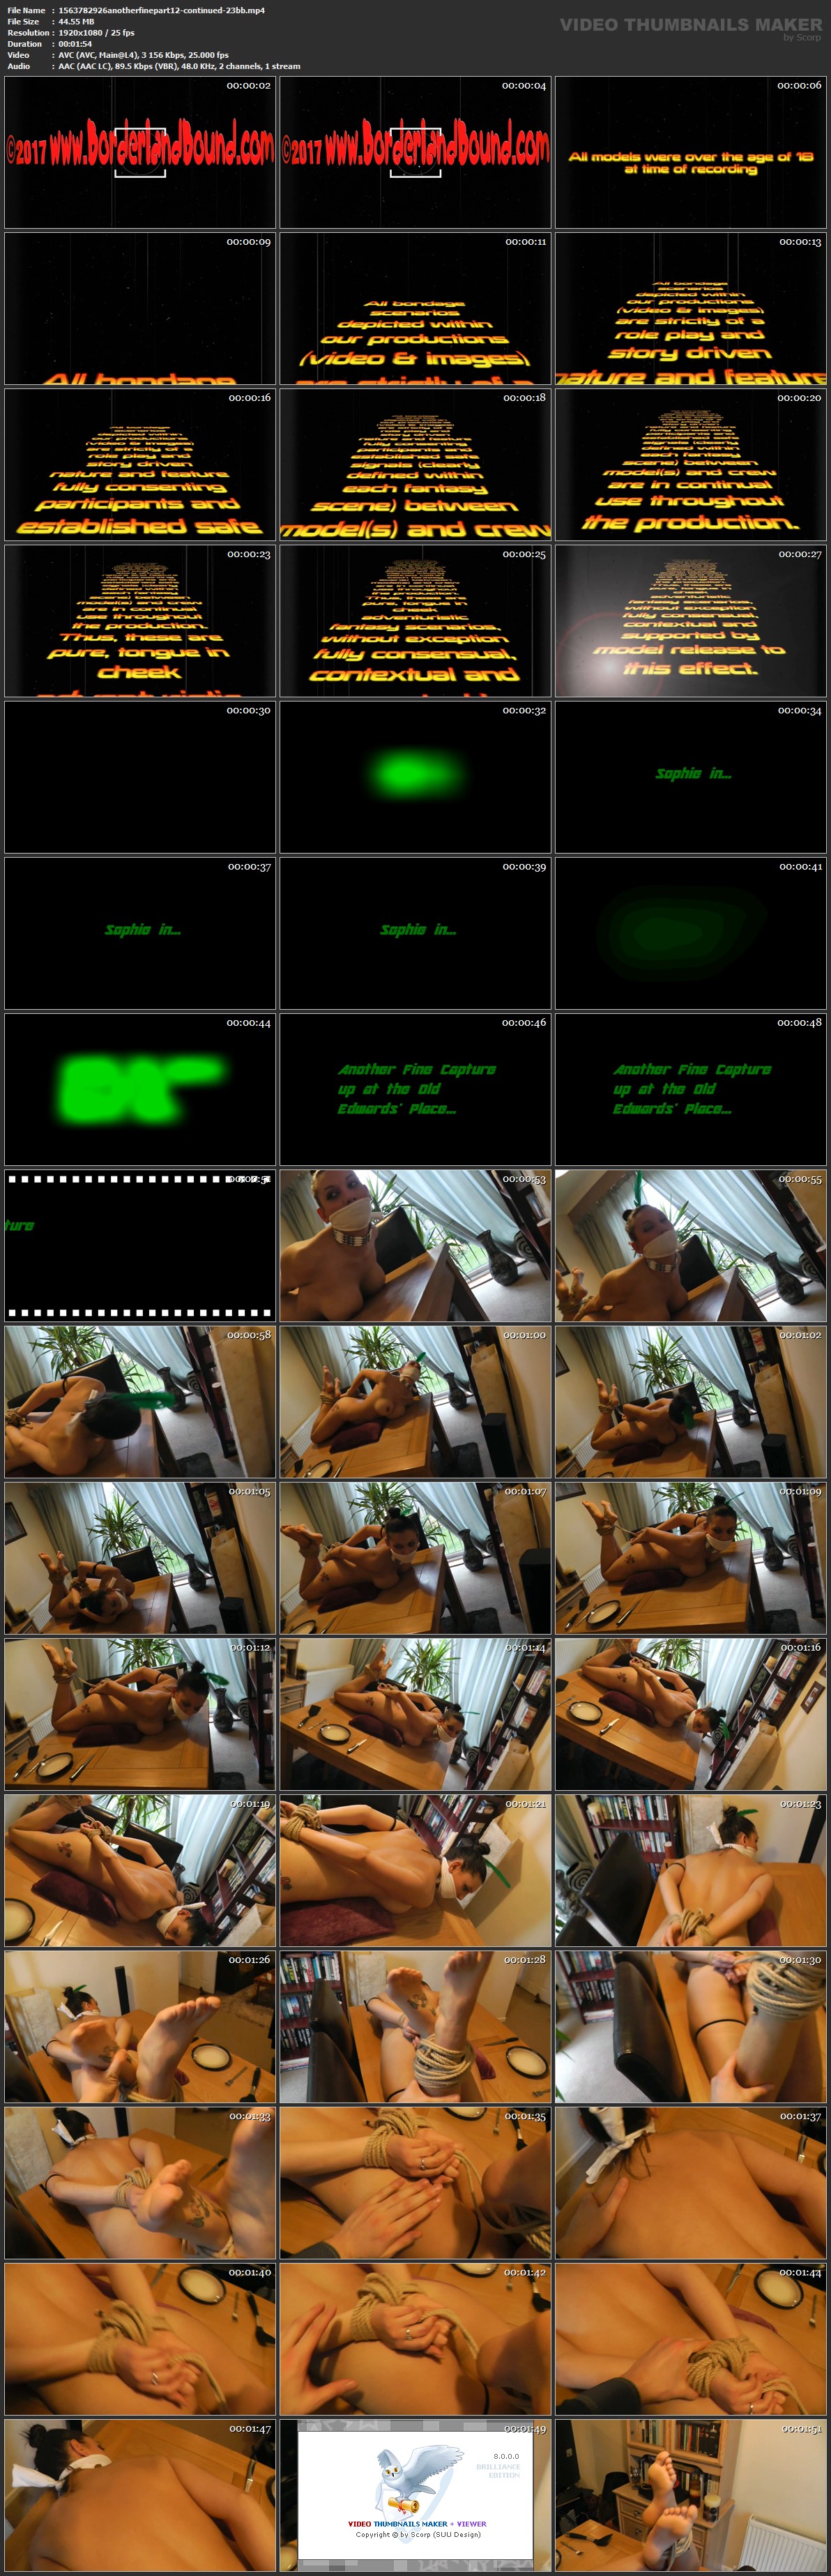 1563782926 anotherfinepart 12 continued 23 bb mp 4